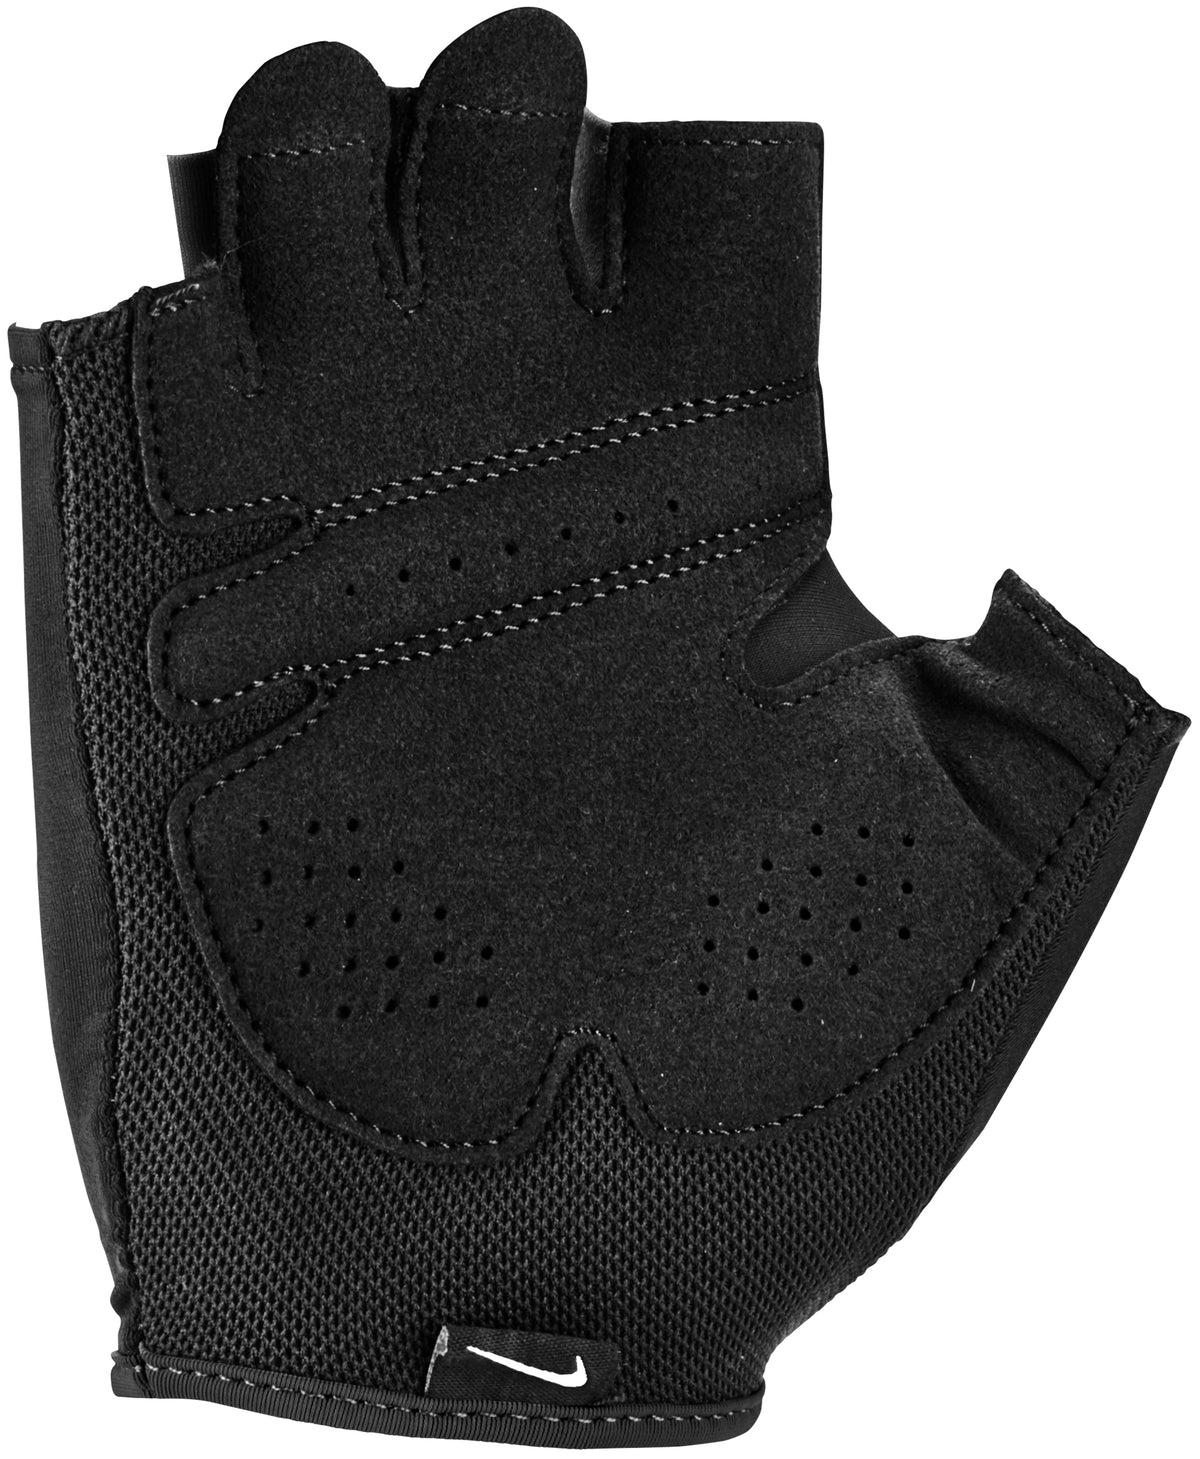 NIKE WOMEN'S GYM ULTIMATE FITNESS GLOVES